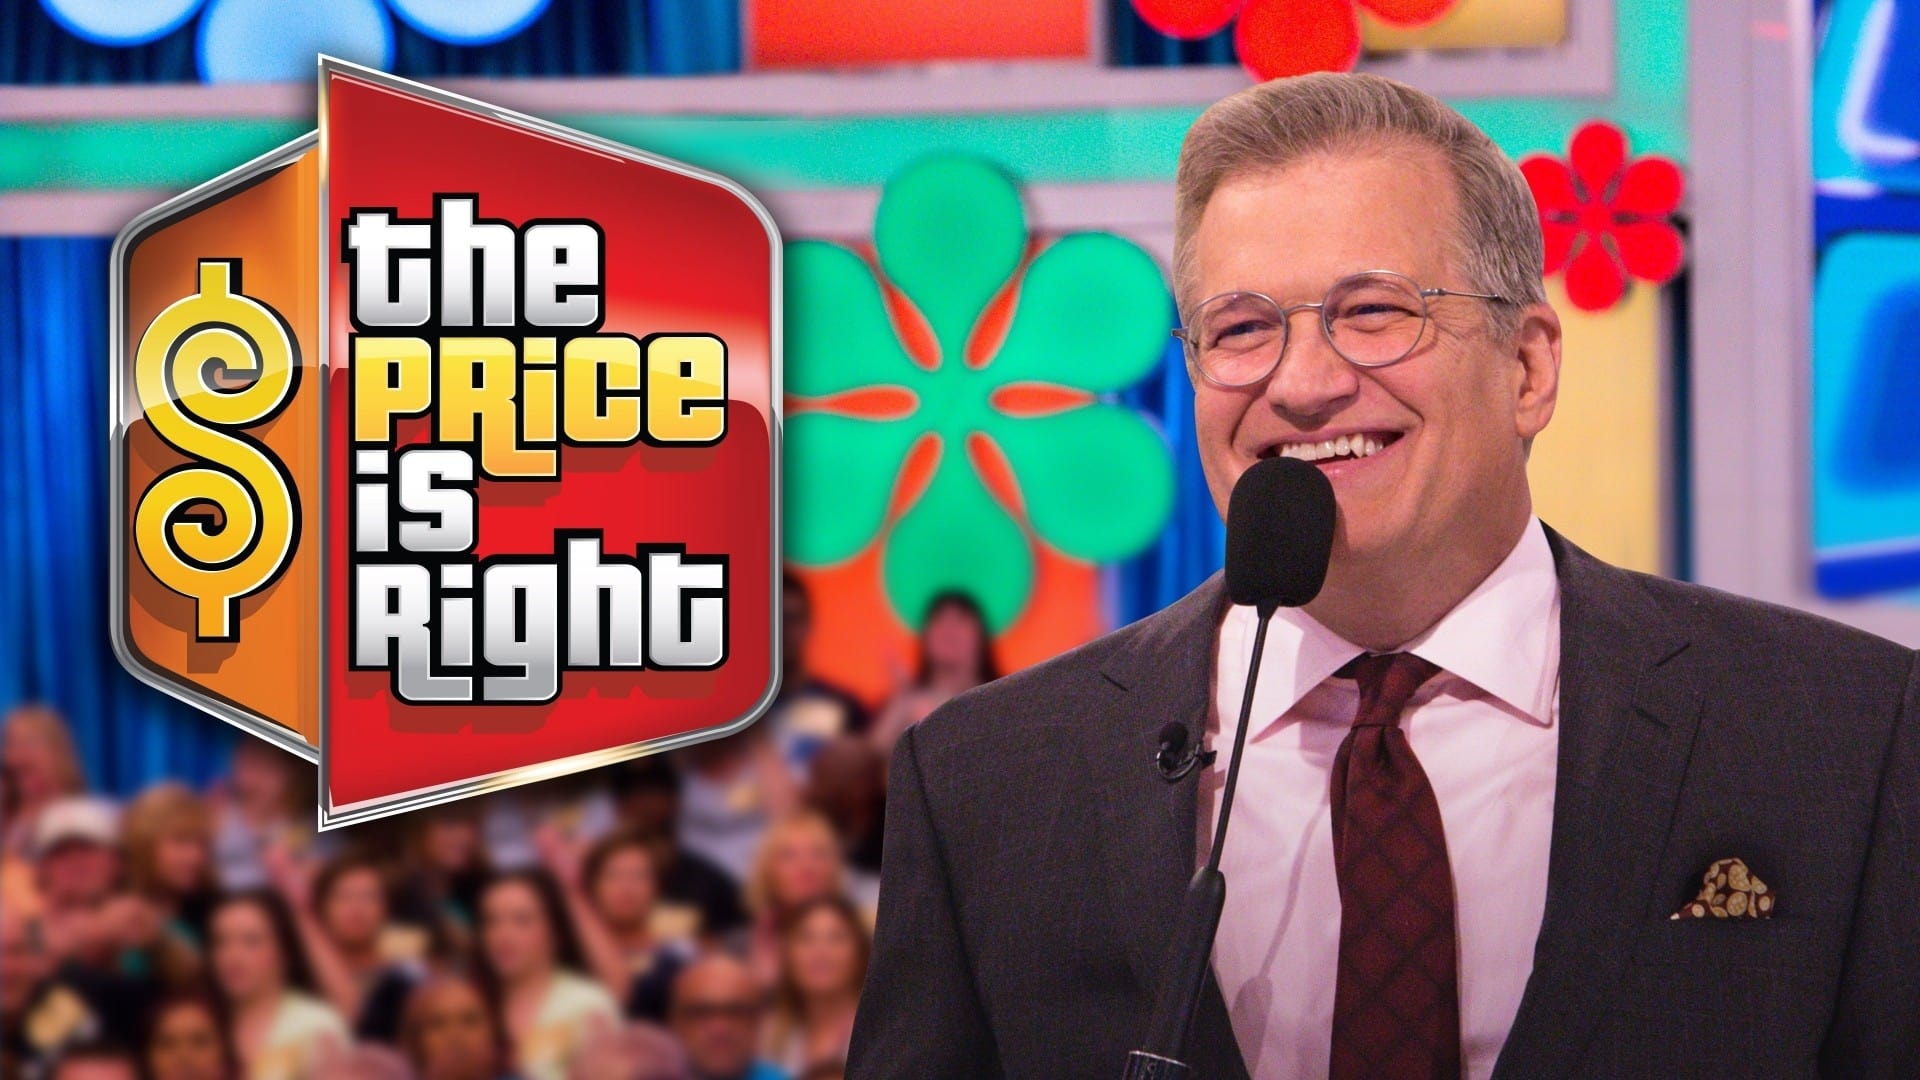 The Price Is Right - Season 5 Episode 118 : The Price Is Right Season 5 Episode 118